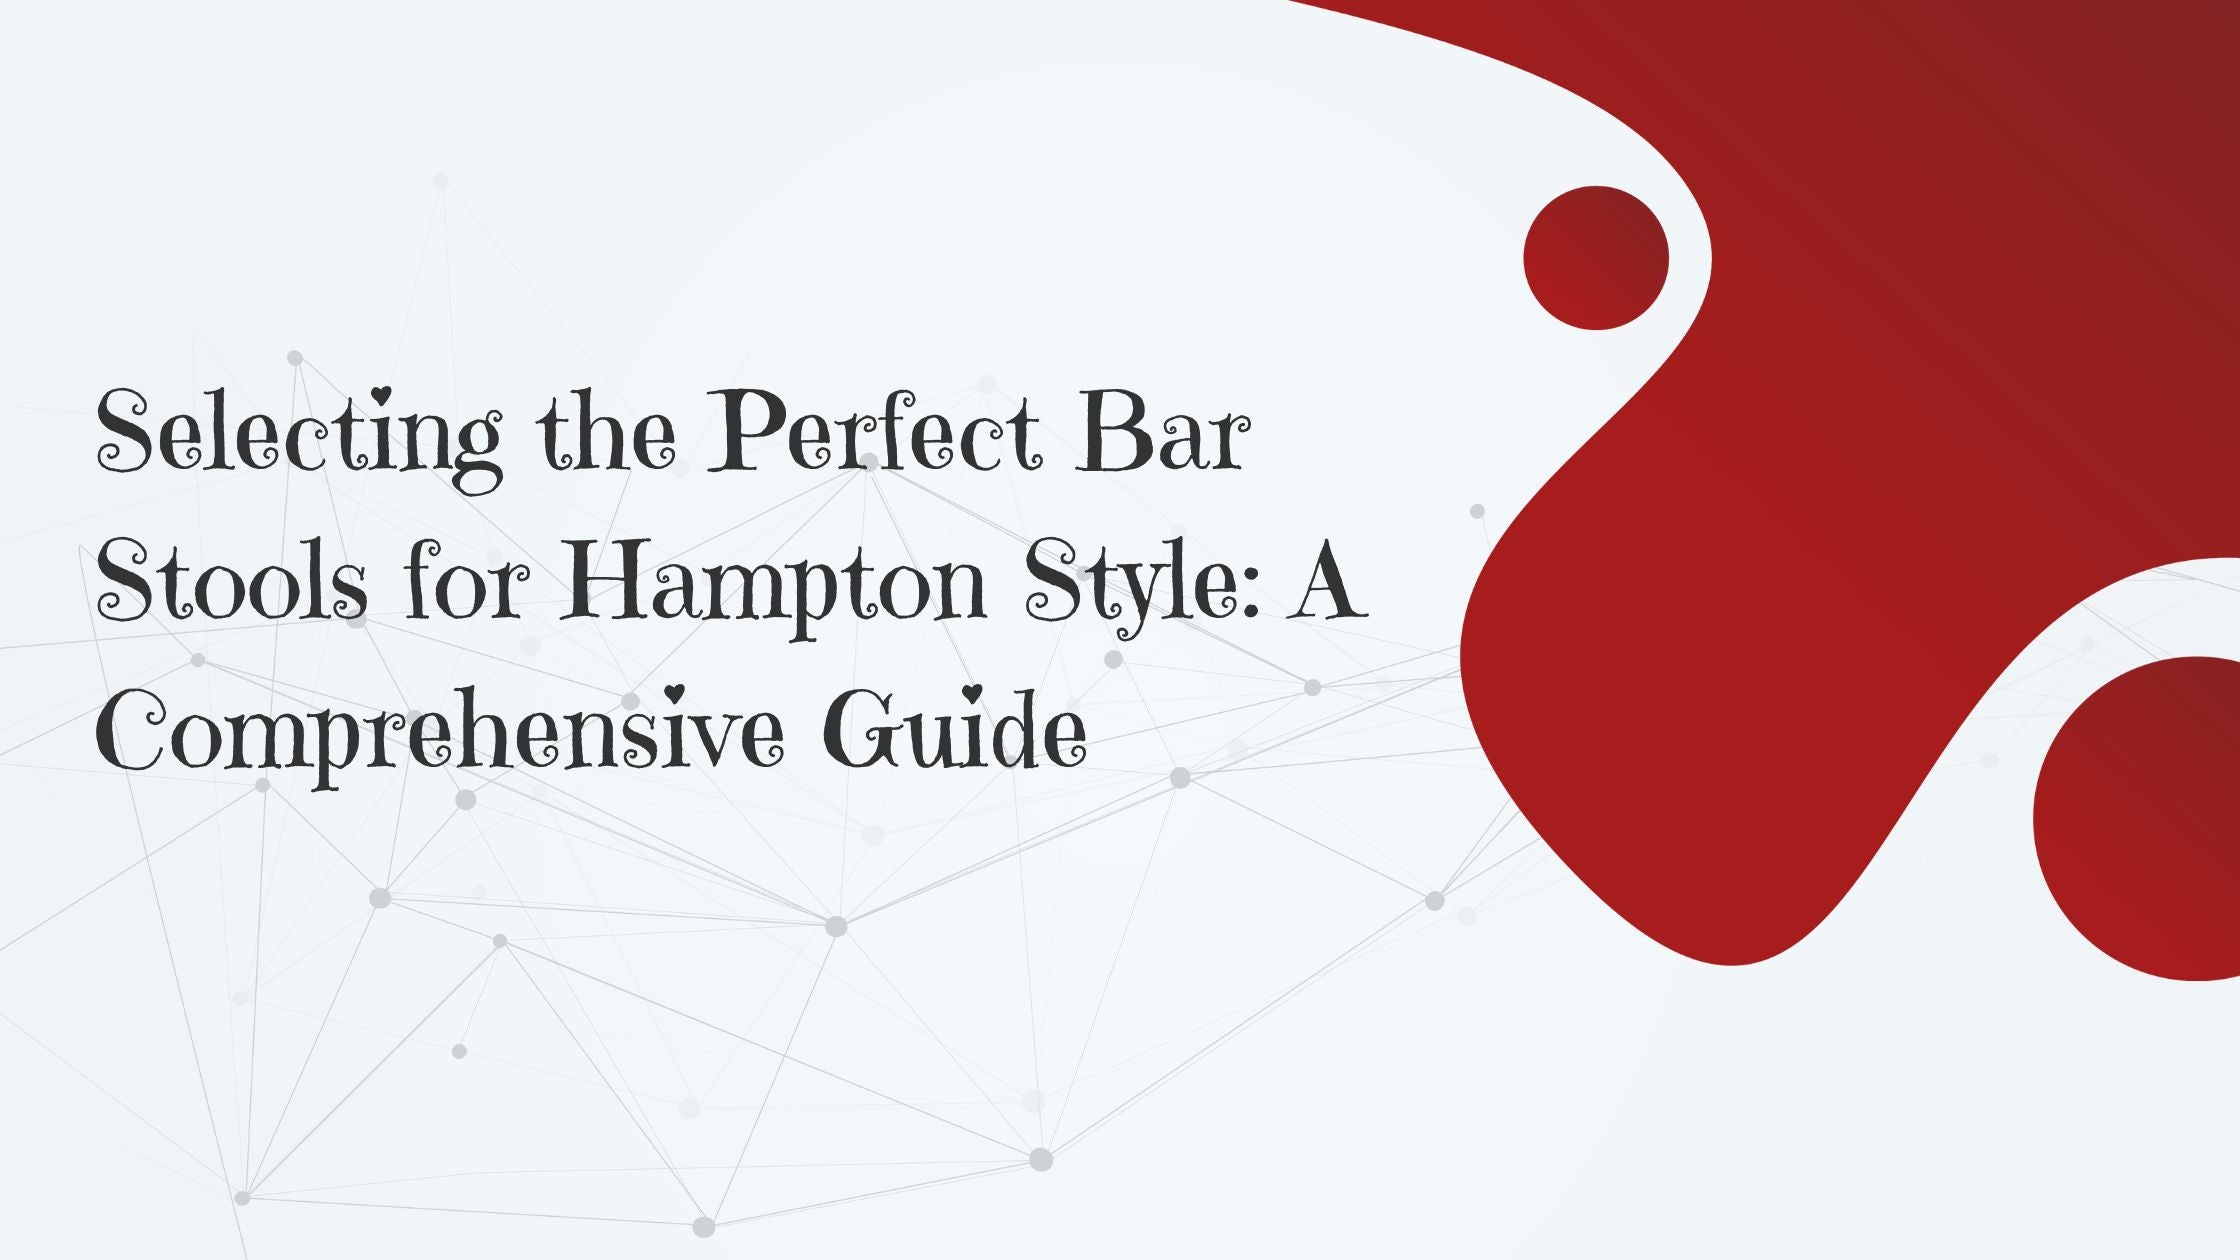 Selecting the Perfect Bar Stools for Hampton Style: A Comprehensive Guide